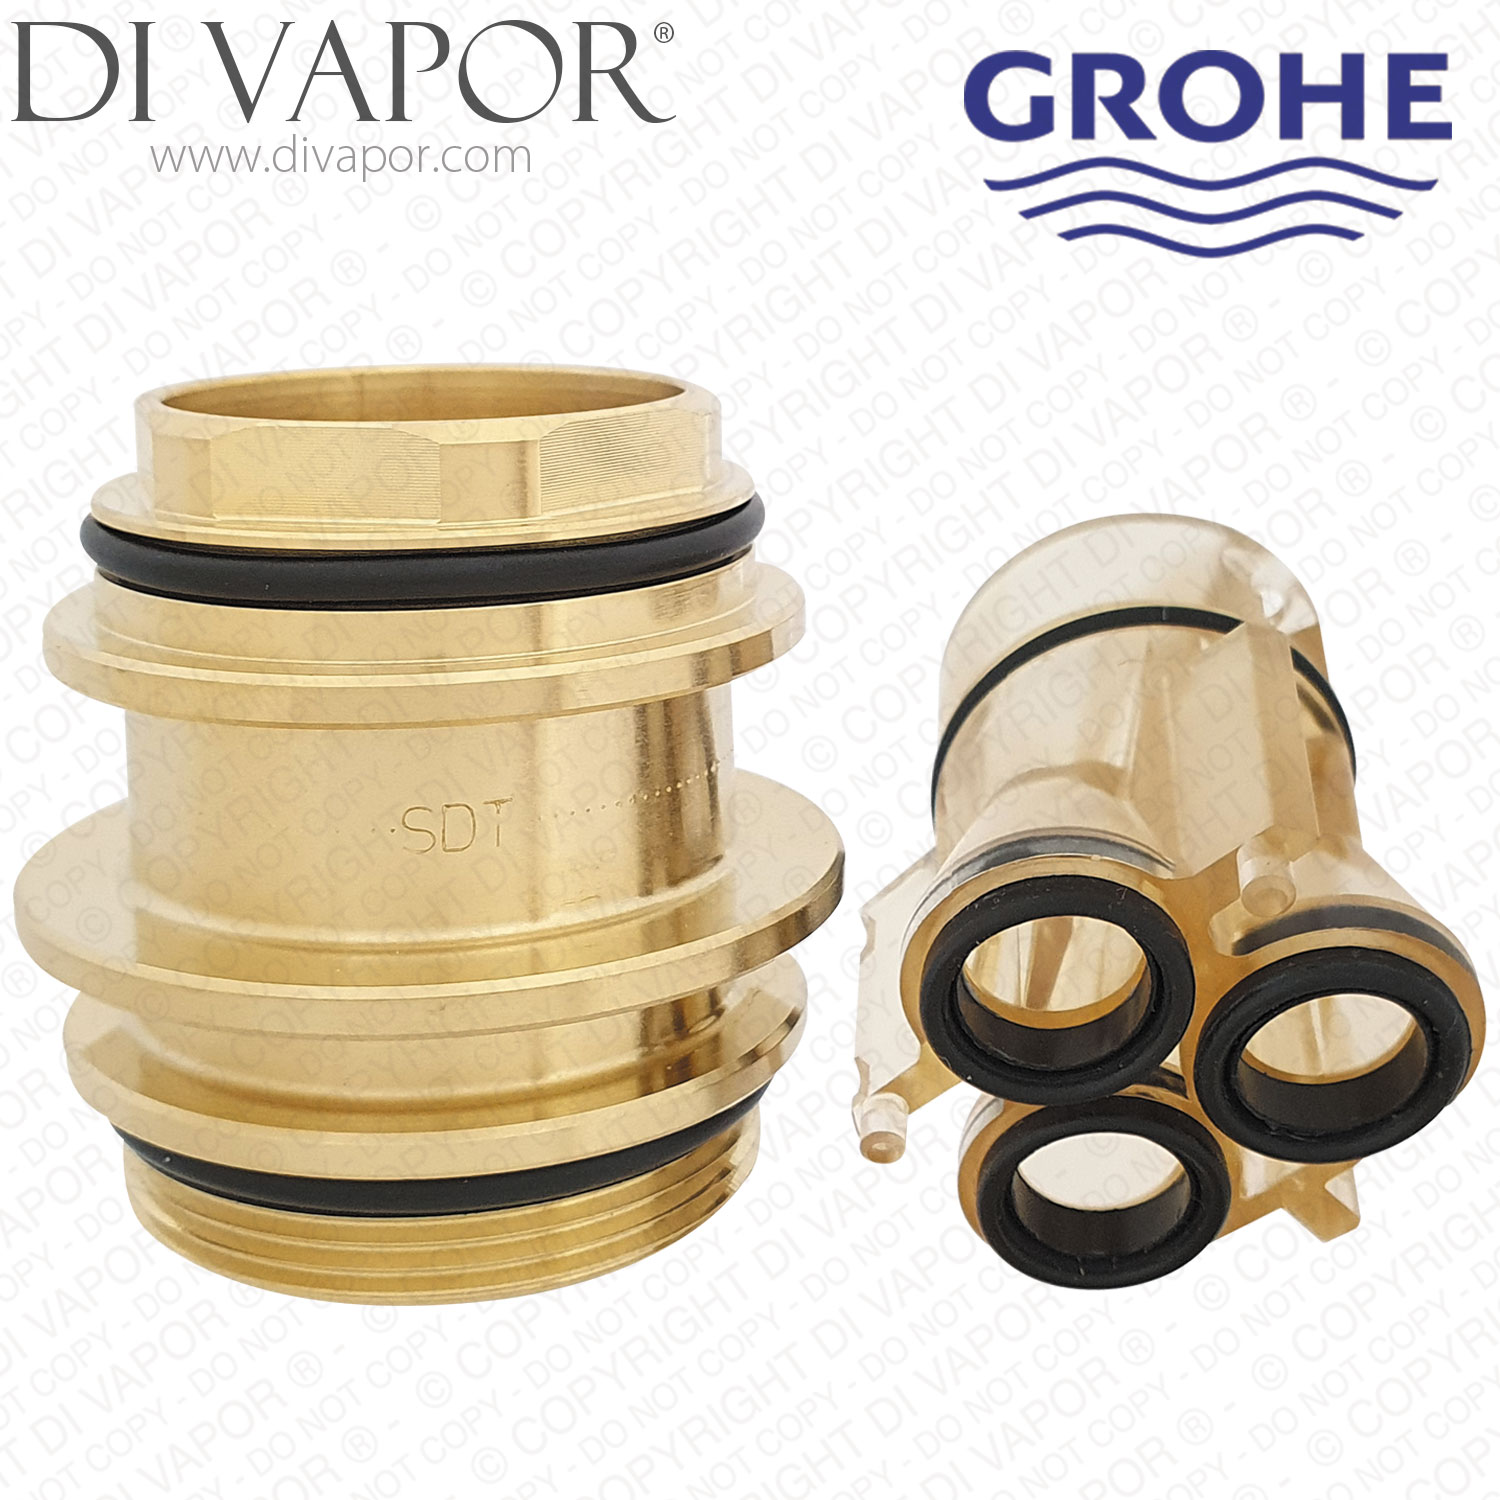 GROHE Grohe Cartridge 47364000 allure 